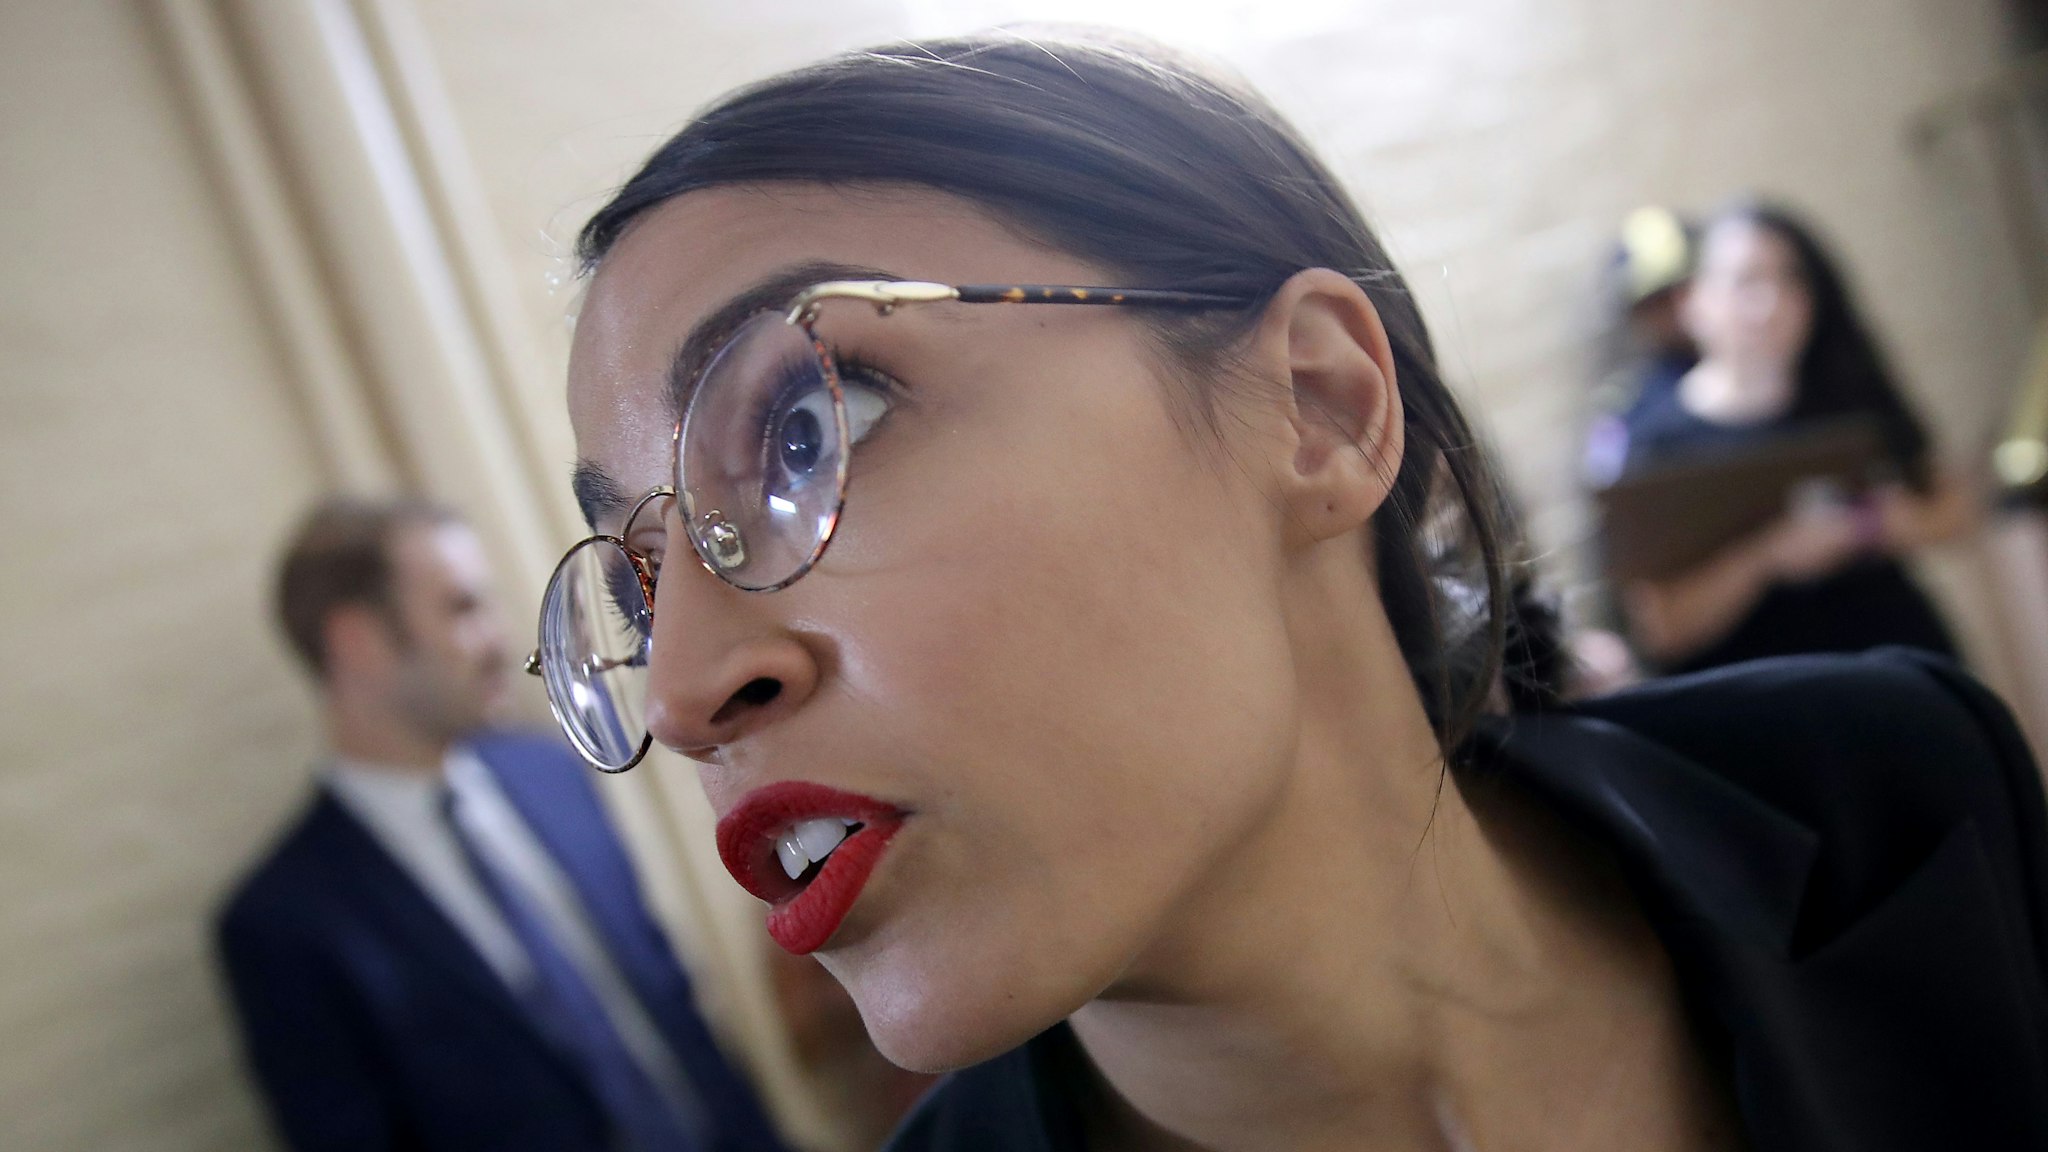 Rep. Alexandria Ocasio-Cortez (D-NY) answers questions from reporters while entering a House Democratic caucus meeting at the U.S. Capitol where formal impeachment proceedings against U.S. President Donald Trump were announced by Speaker of the House Nancy Pelosi September 24, 2019 in Washington, DC. Pelosi announced a formal impeachment inquiry after allegations that President Donald Trump sought to pressure the president of Ukraine to investigate leading Democratic presidential contender, former Vice President Joe Biden and his son, which was the subject of a reported whistle-blower complaint that the Trump administration has withheld from Congress.